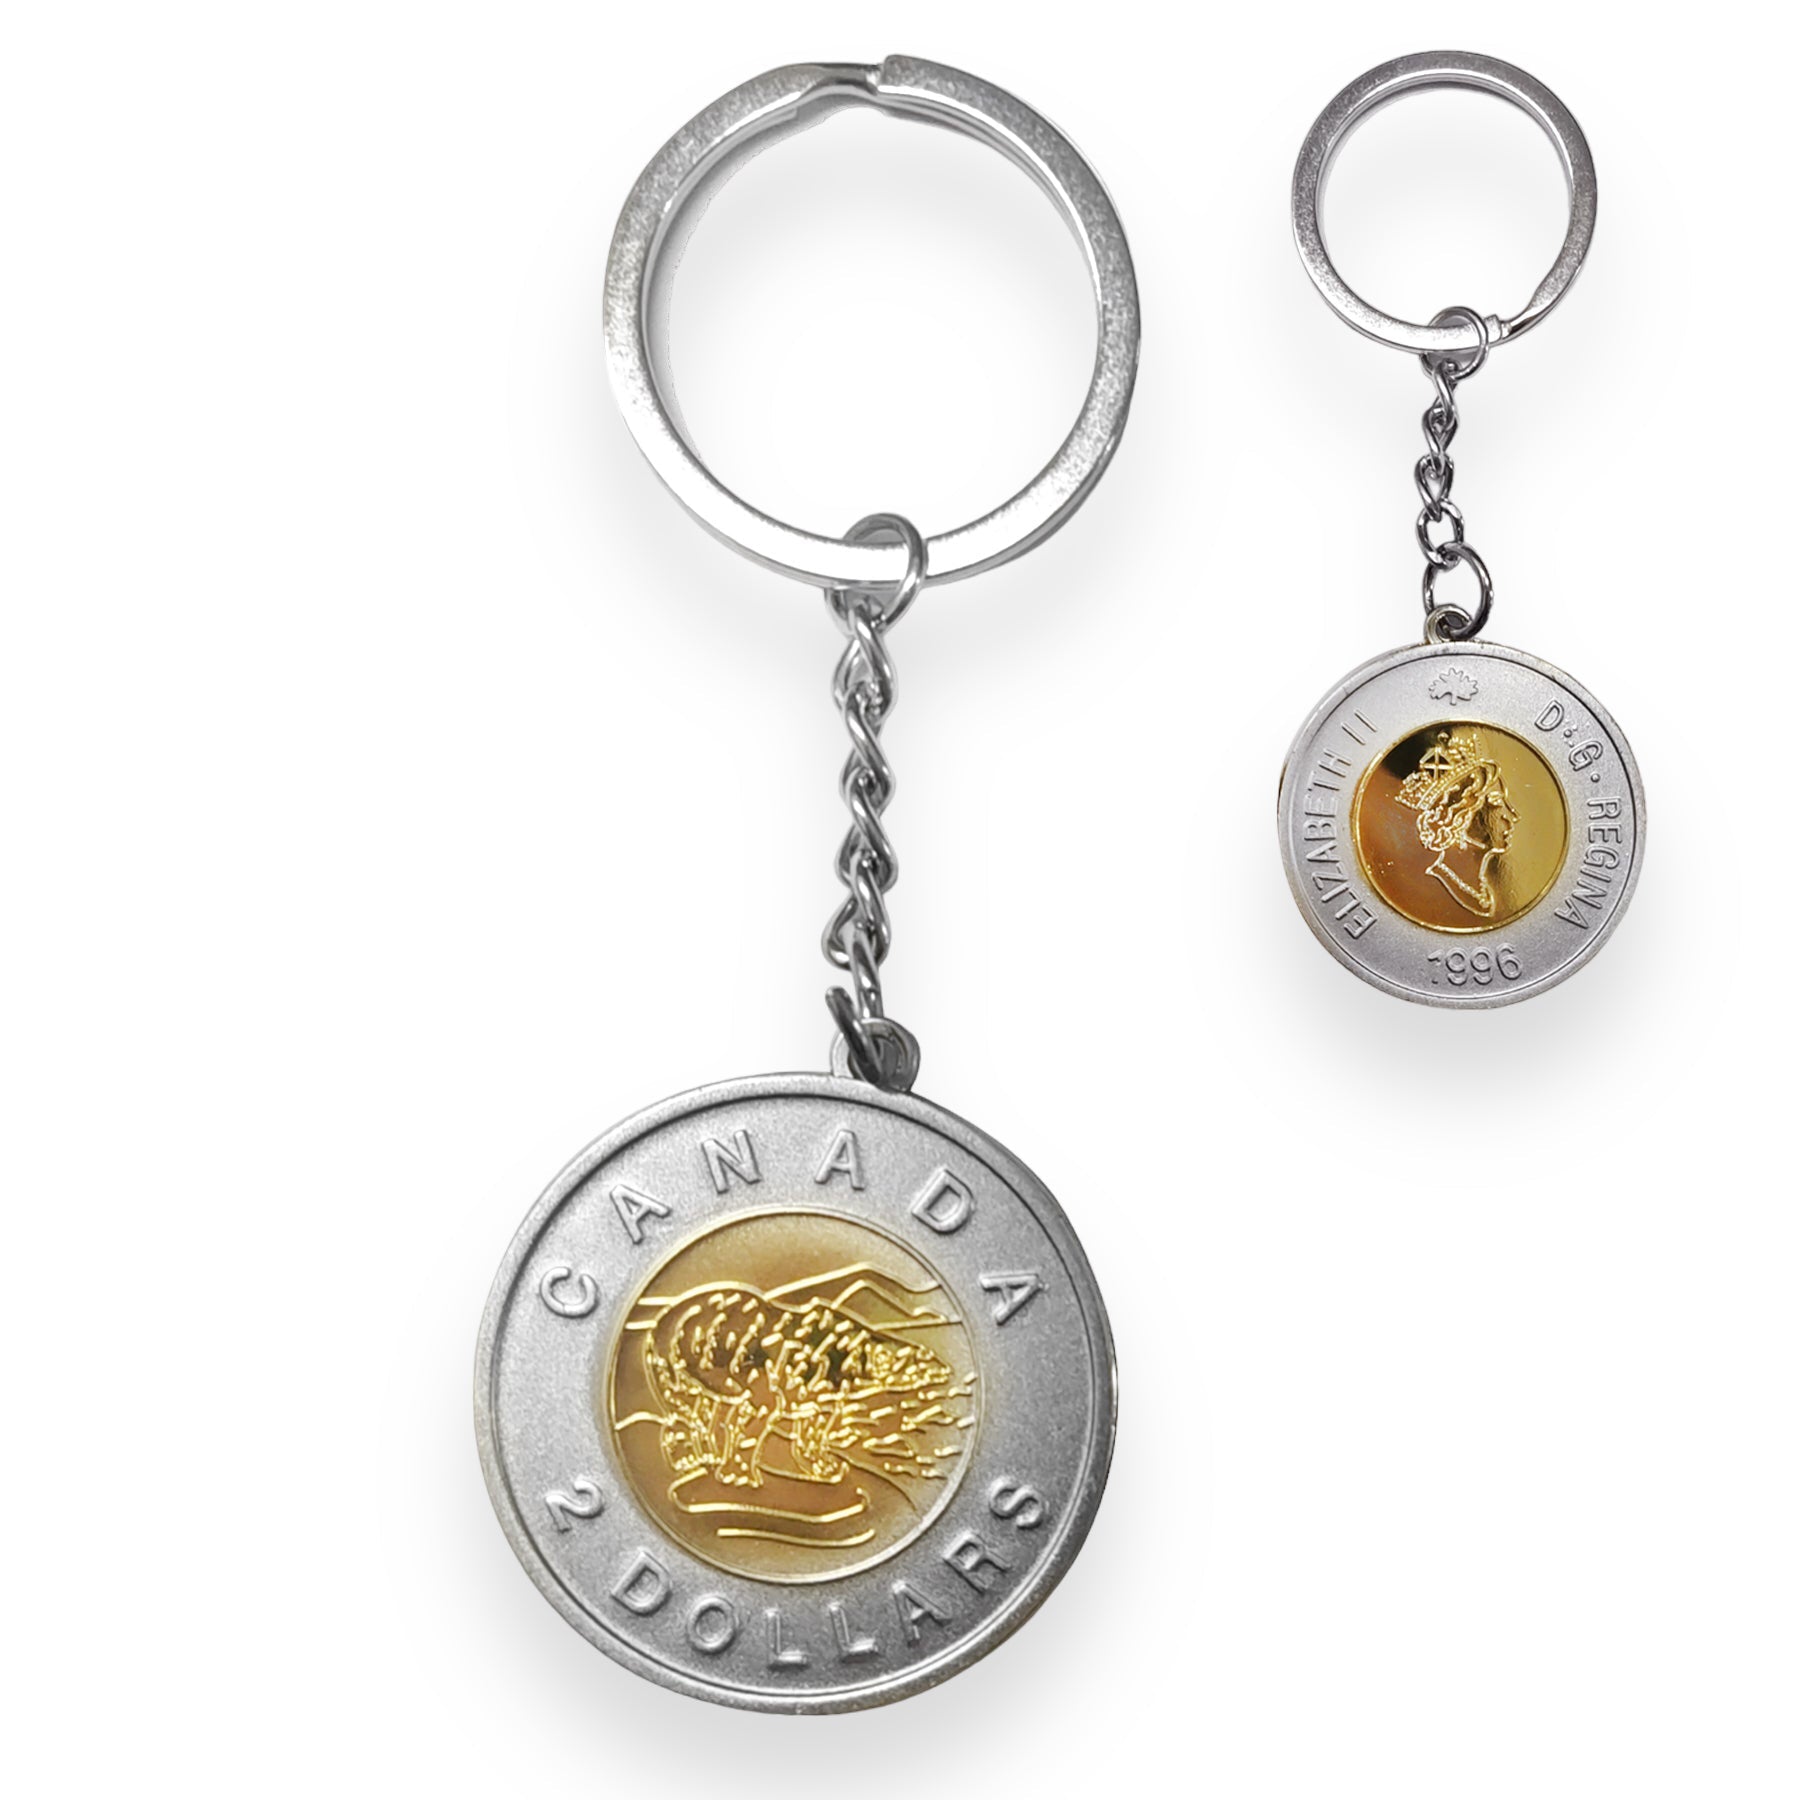 CANADA TOONIE KEYCHAIN - TWO DOLLARS KEY RING COIN